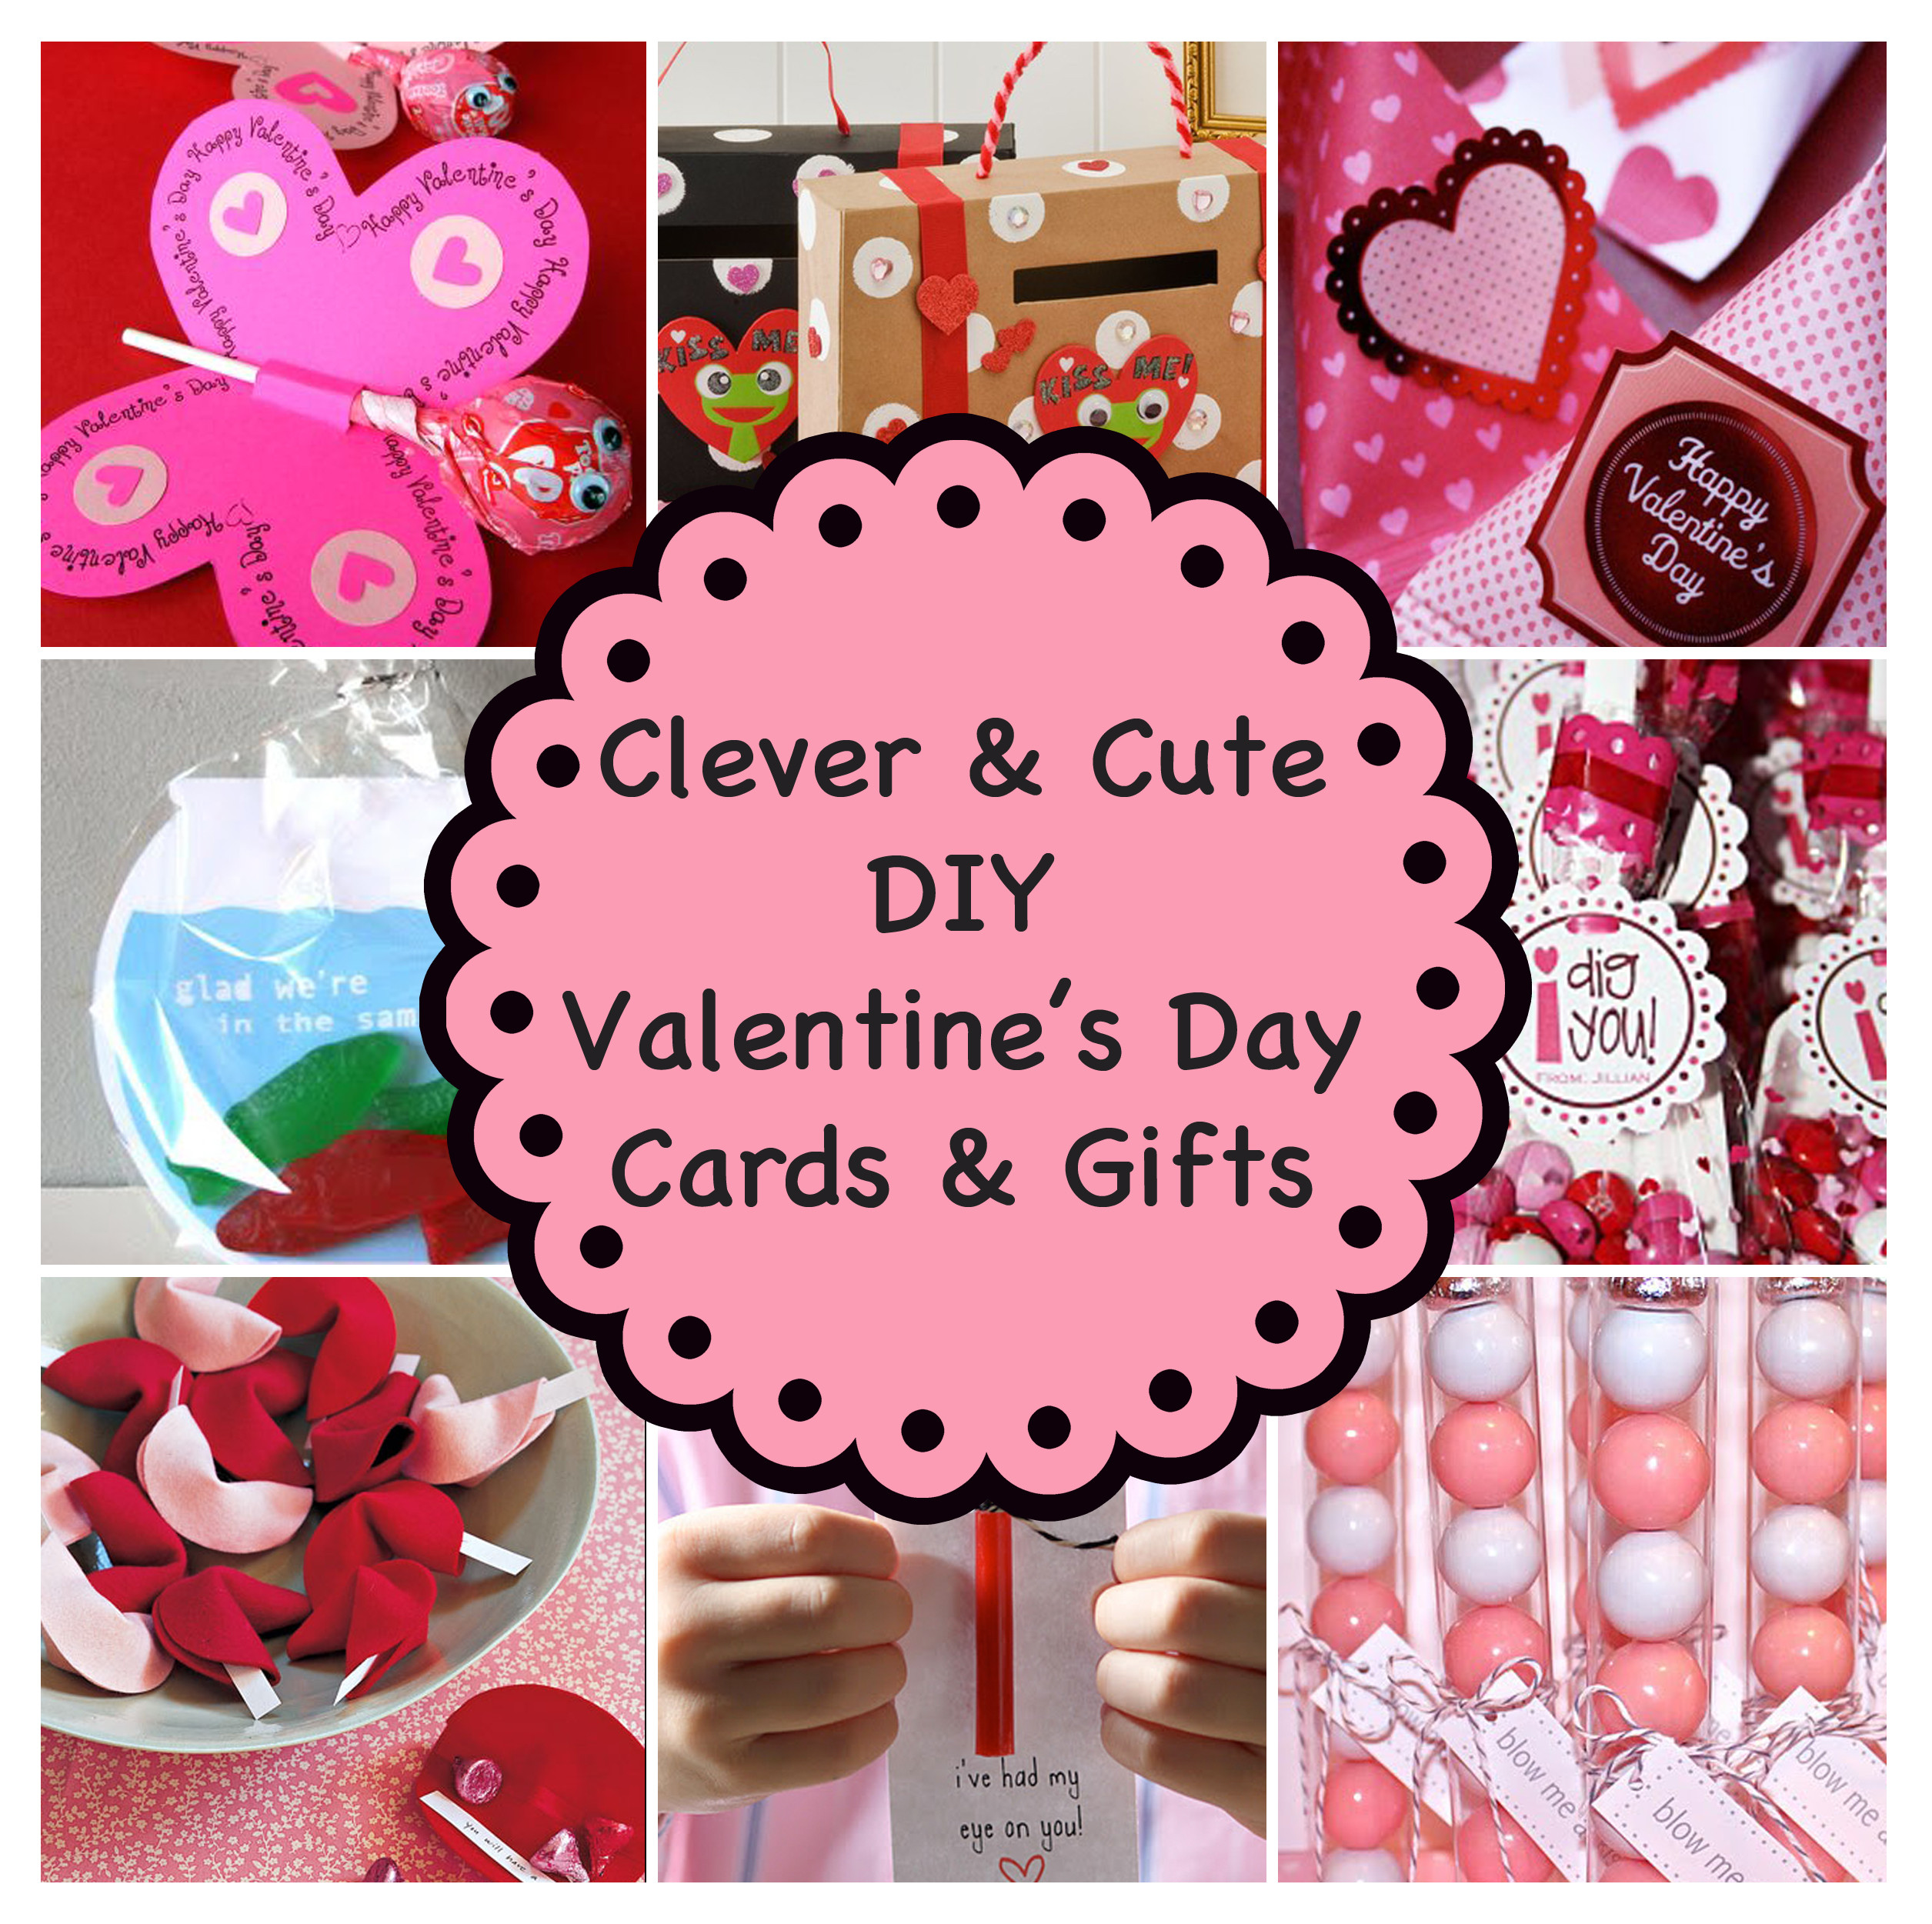 Valentines Day Homemade Gift
 Clever and Cute DIY Valentine’s Day Cards & Gifts